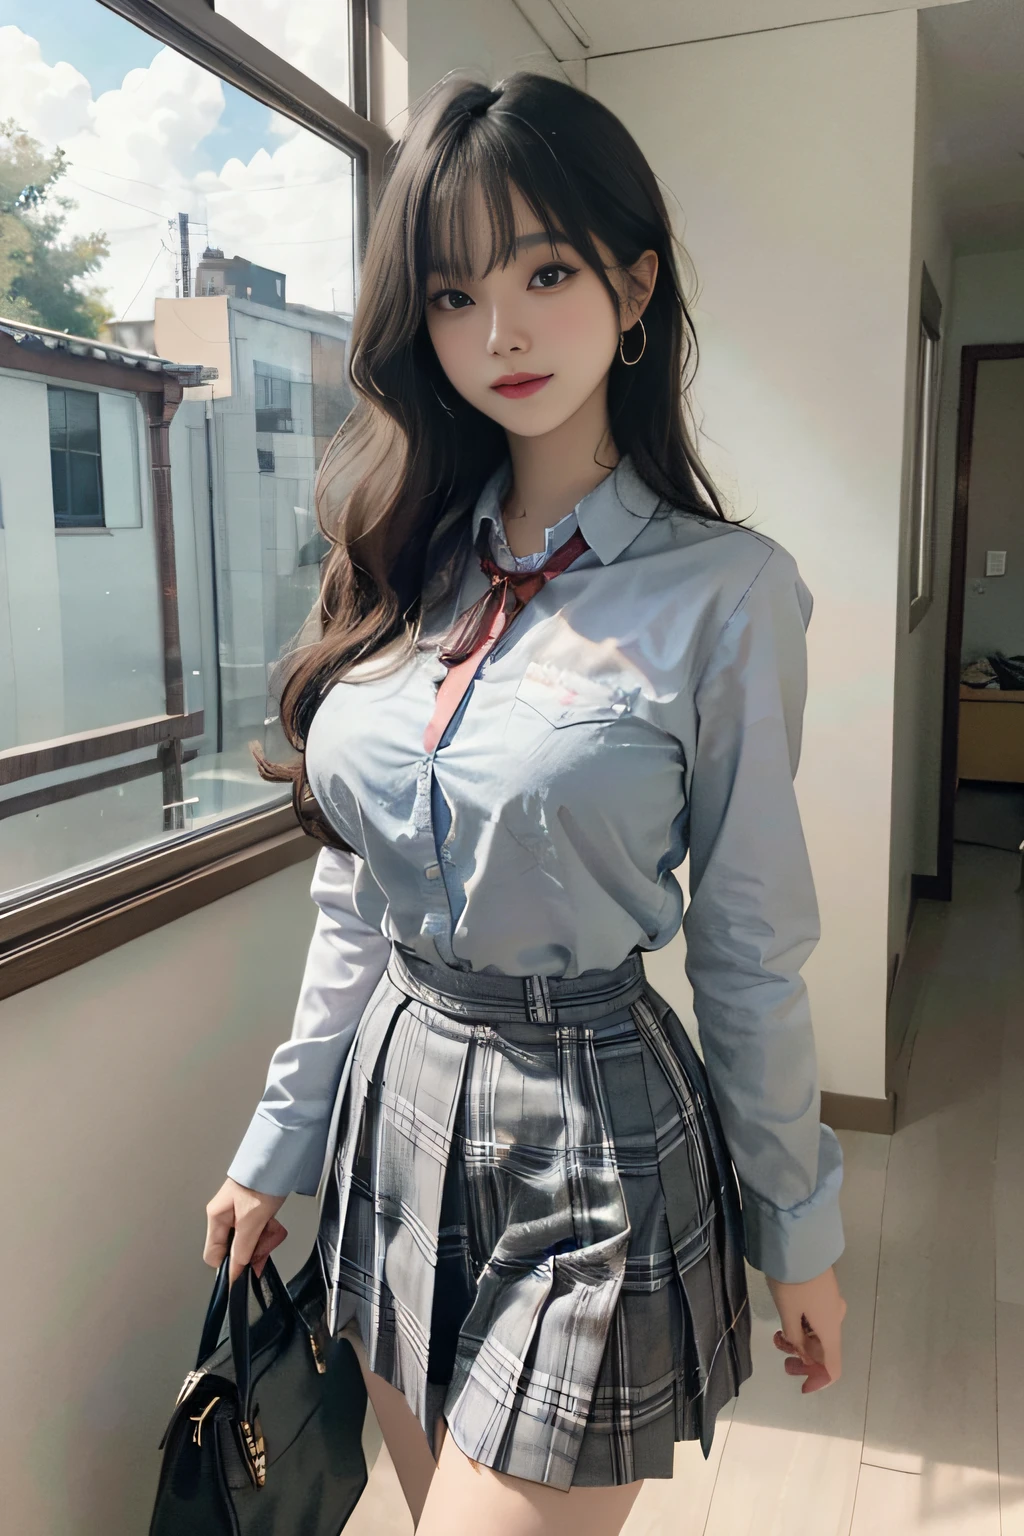 Best image quality, RAW photo, super high resolution, taken from the side, gentle smile, 16 years old Korean, very big breasts, tie, ribbon, school uniform, collared shirt,  shirt, plaid skirt, fair skin, shiny white skin, short bob, bright silver hair, bright gray hair, neatly aligned bangs, beautiful eyes, beautiful eyes of random colors, very thin lips, beautiful eyes with details, elongated eyes, pale pink blush, long eyelashes, beautiful double eyelids, eyeshadow, earrings, necklace, school, pitch-black hallway, standing next to the wall, holding a string in hand